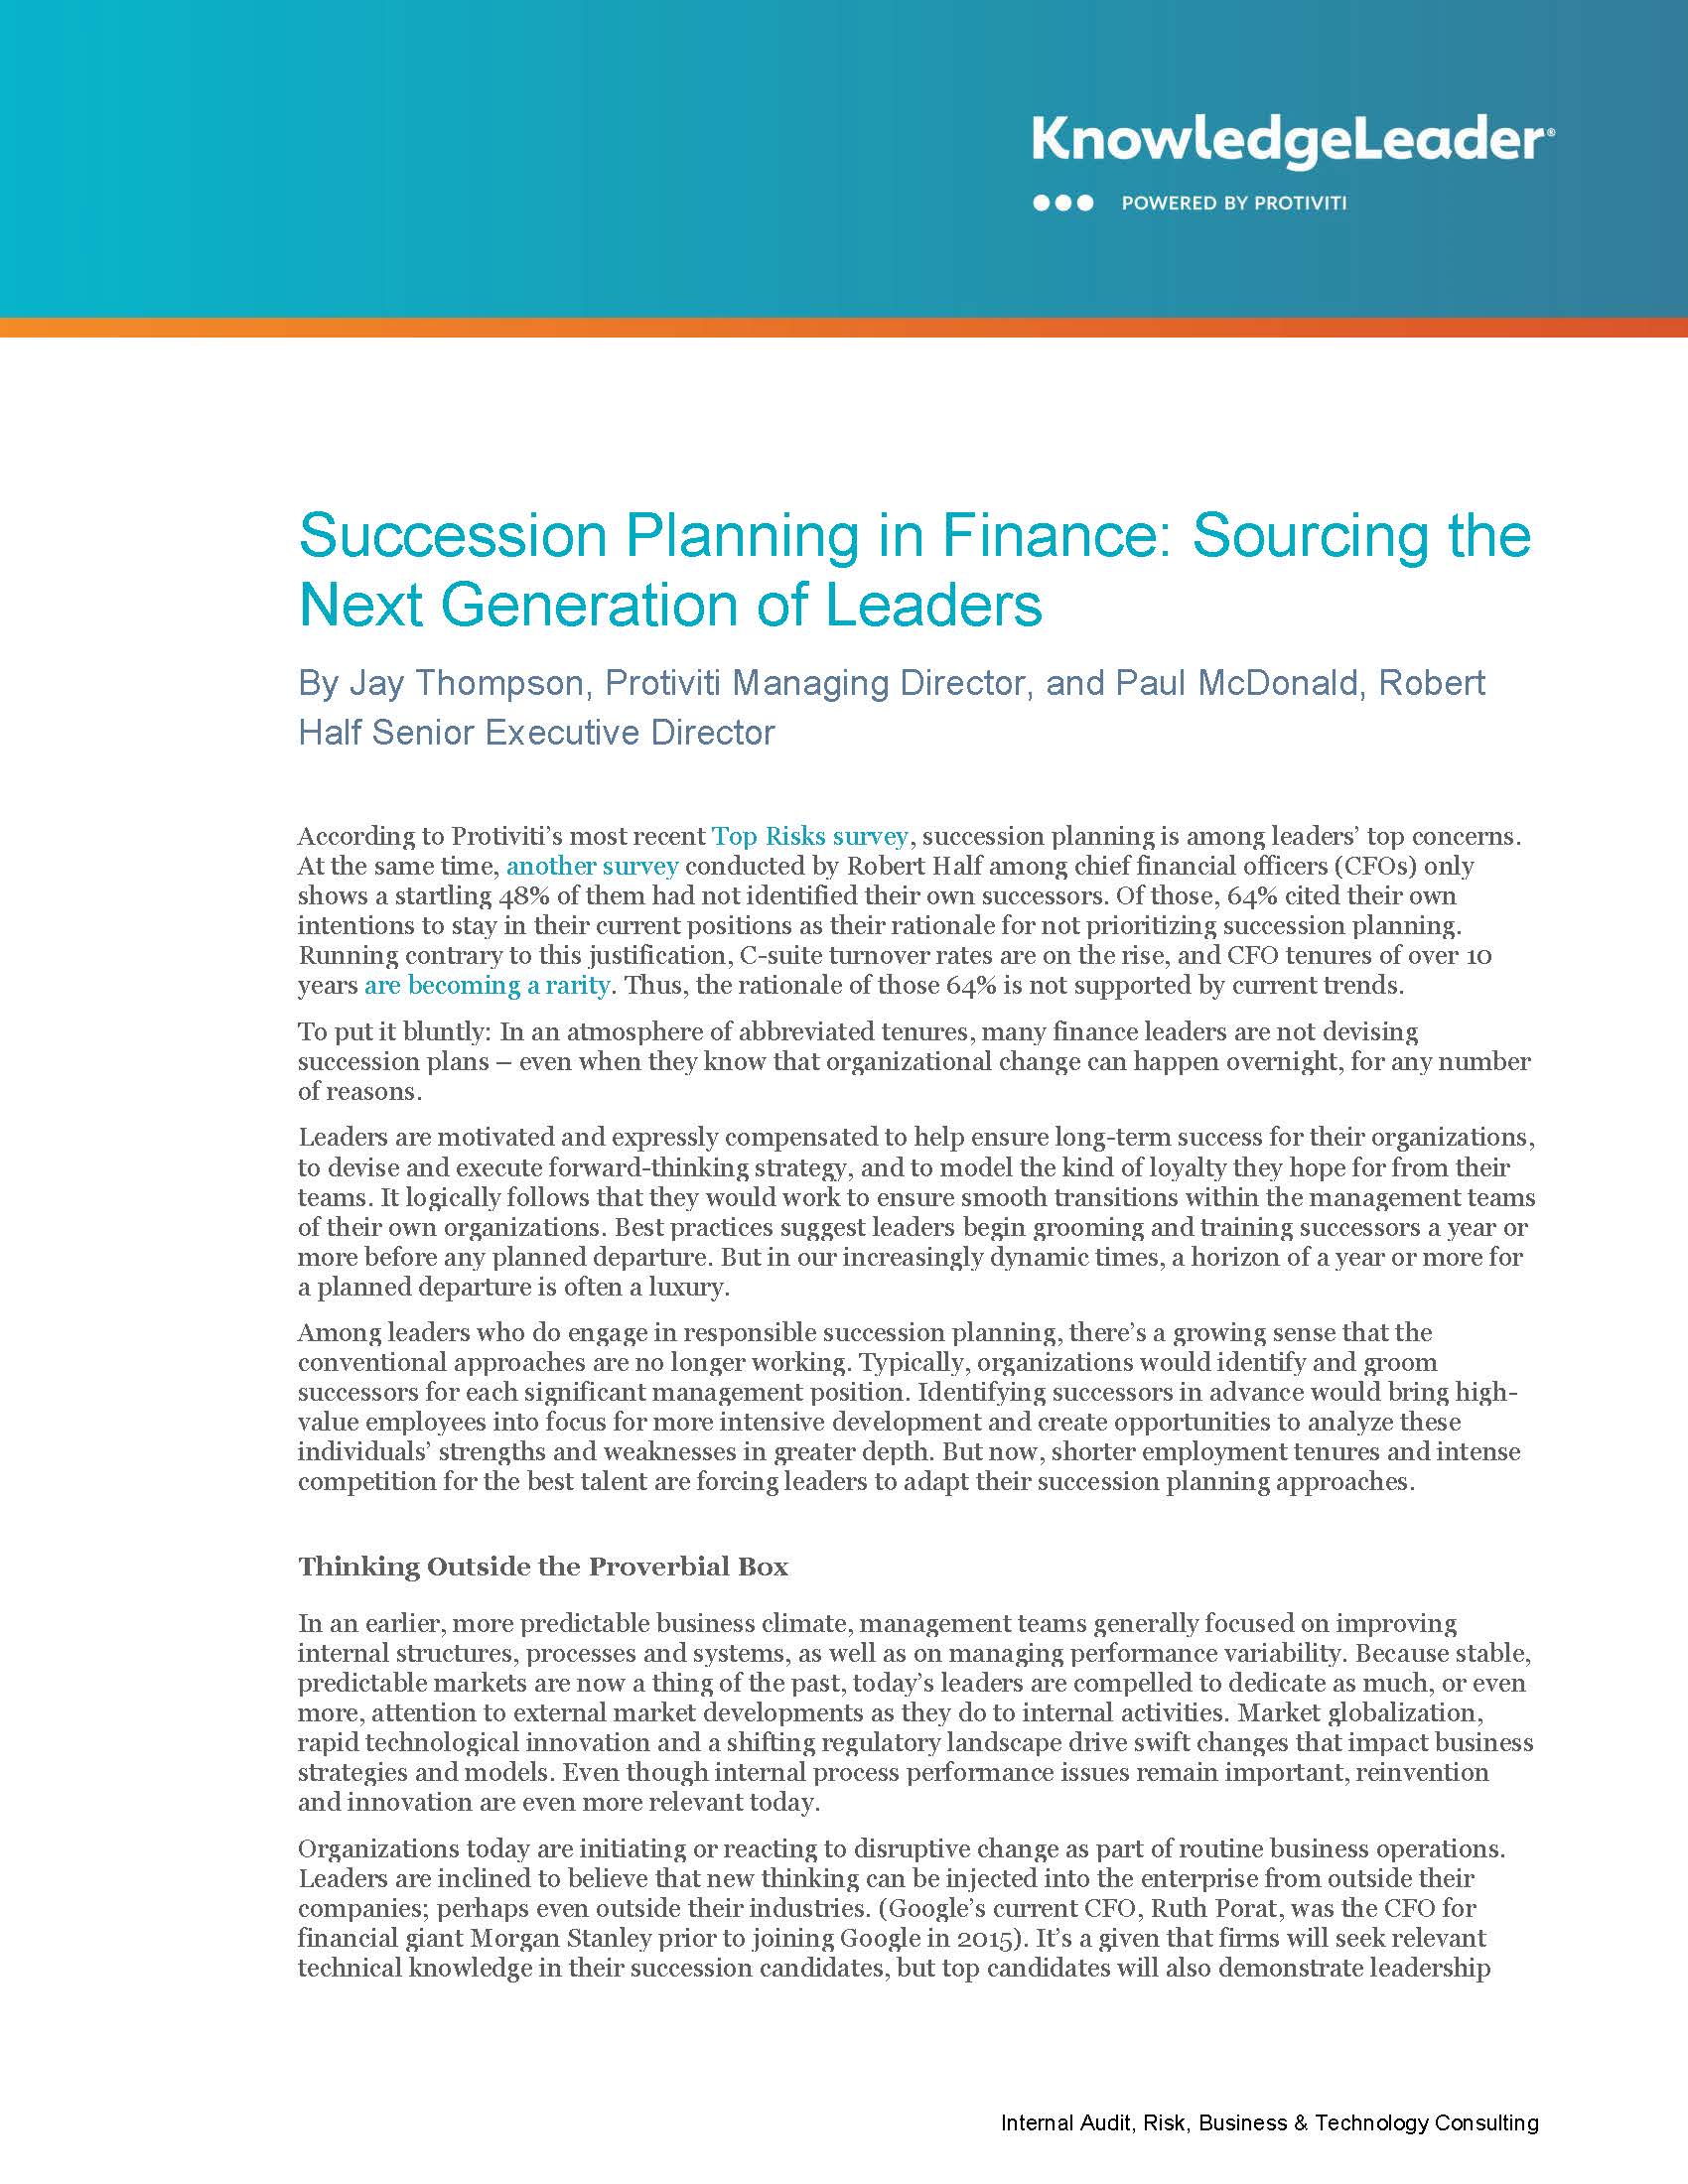 Succession Planning in Finance Sourcing the Next Generation of Leaders